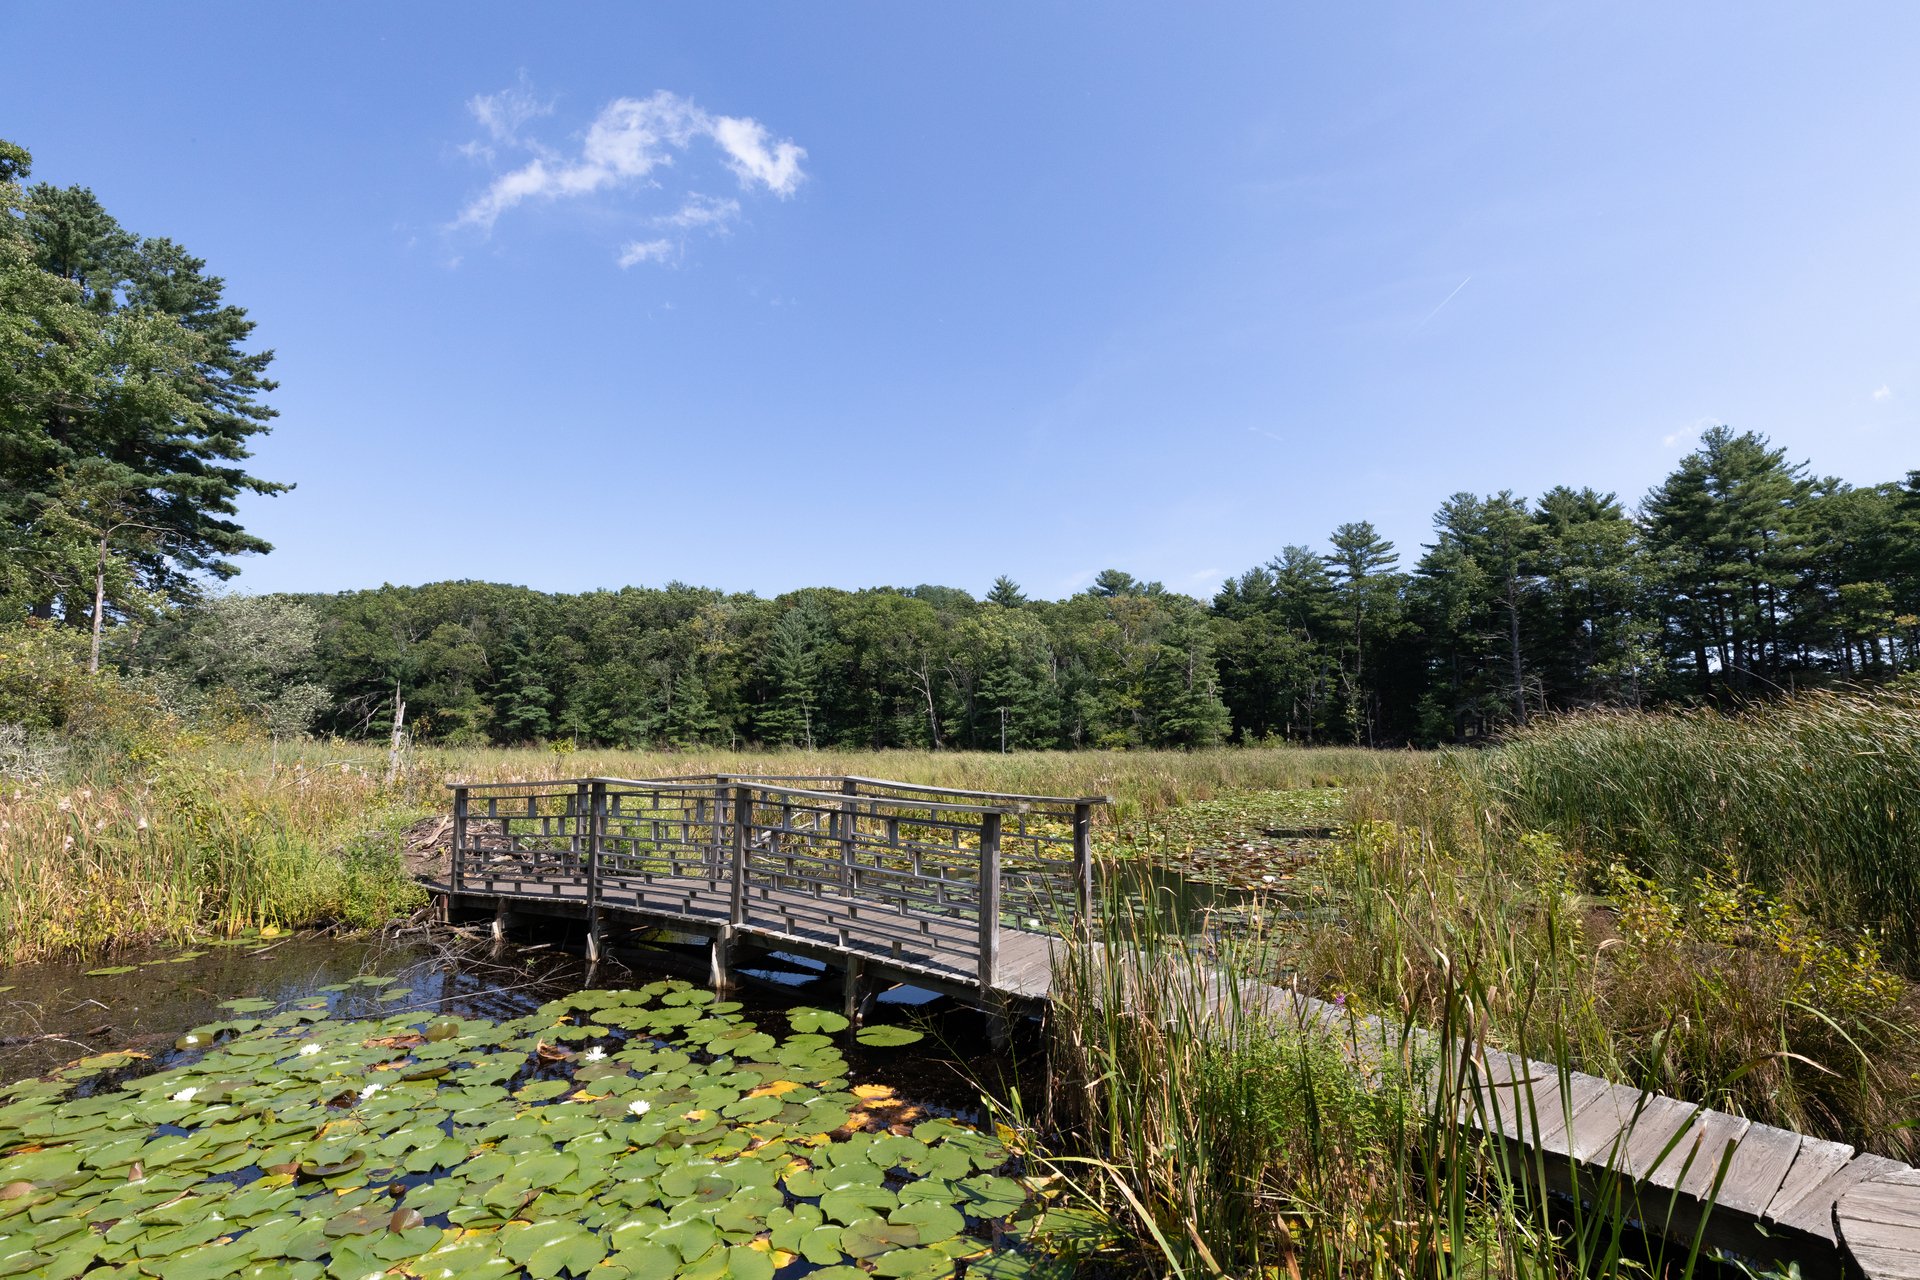 A wooden bridge crosses over a small pond, surrounded by lush, green shrubs and trees. The pond is full of lily pads.